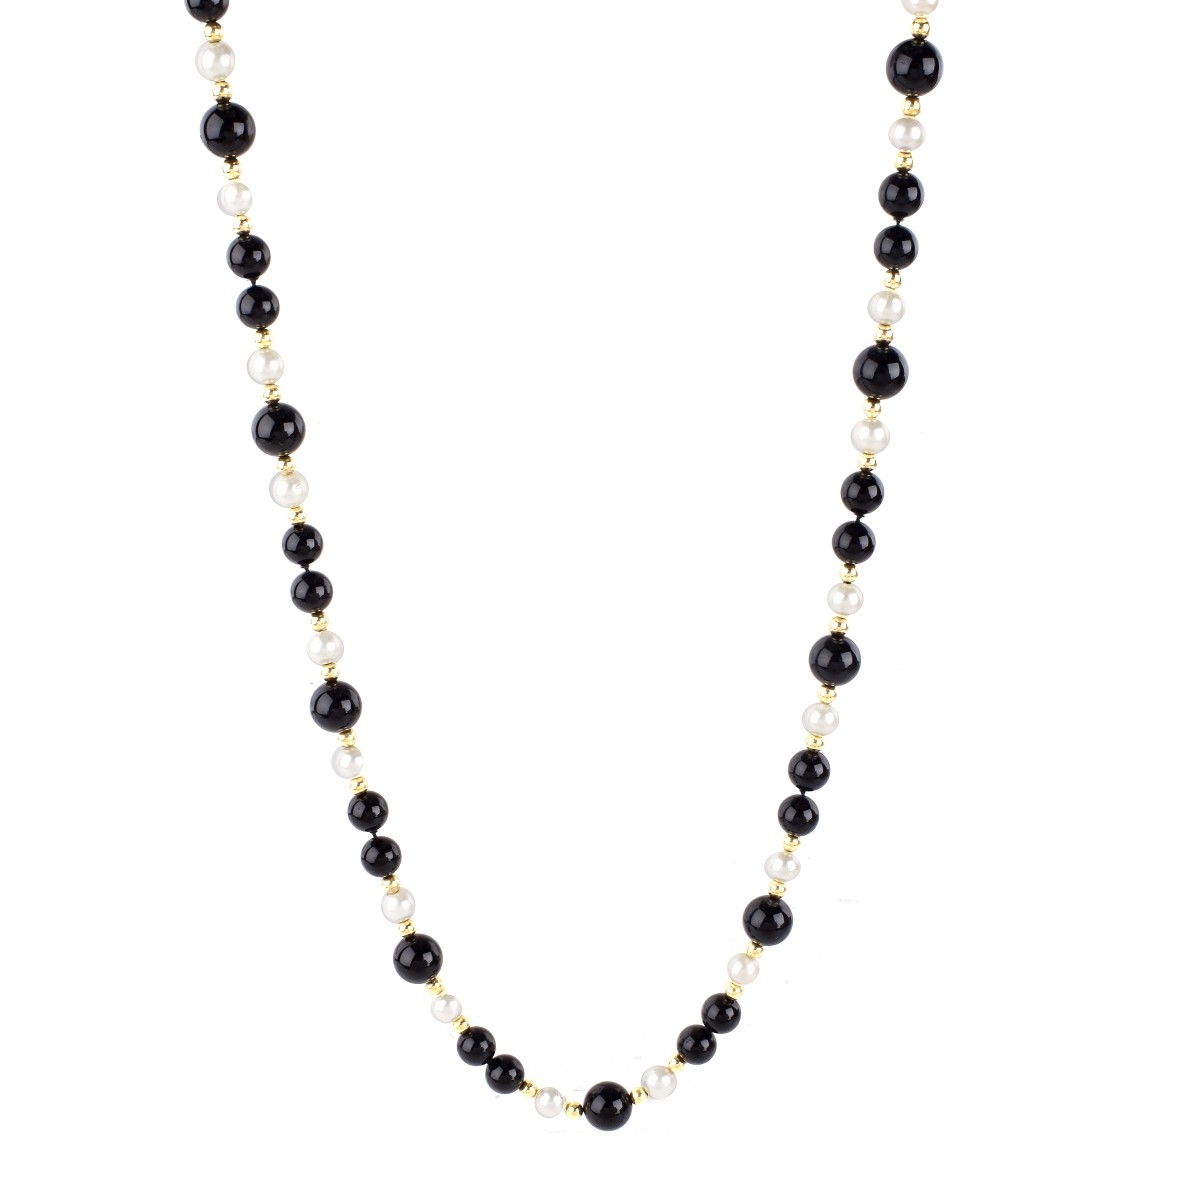 Vintage 14K Gold, Onyx and Pearl Necklace